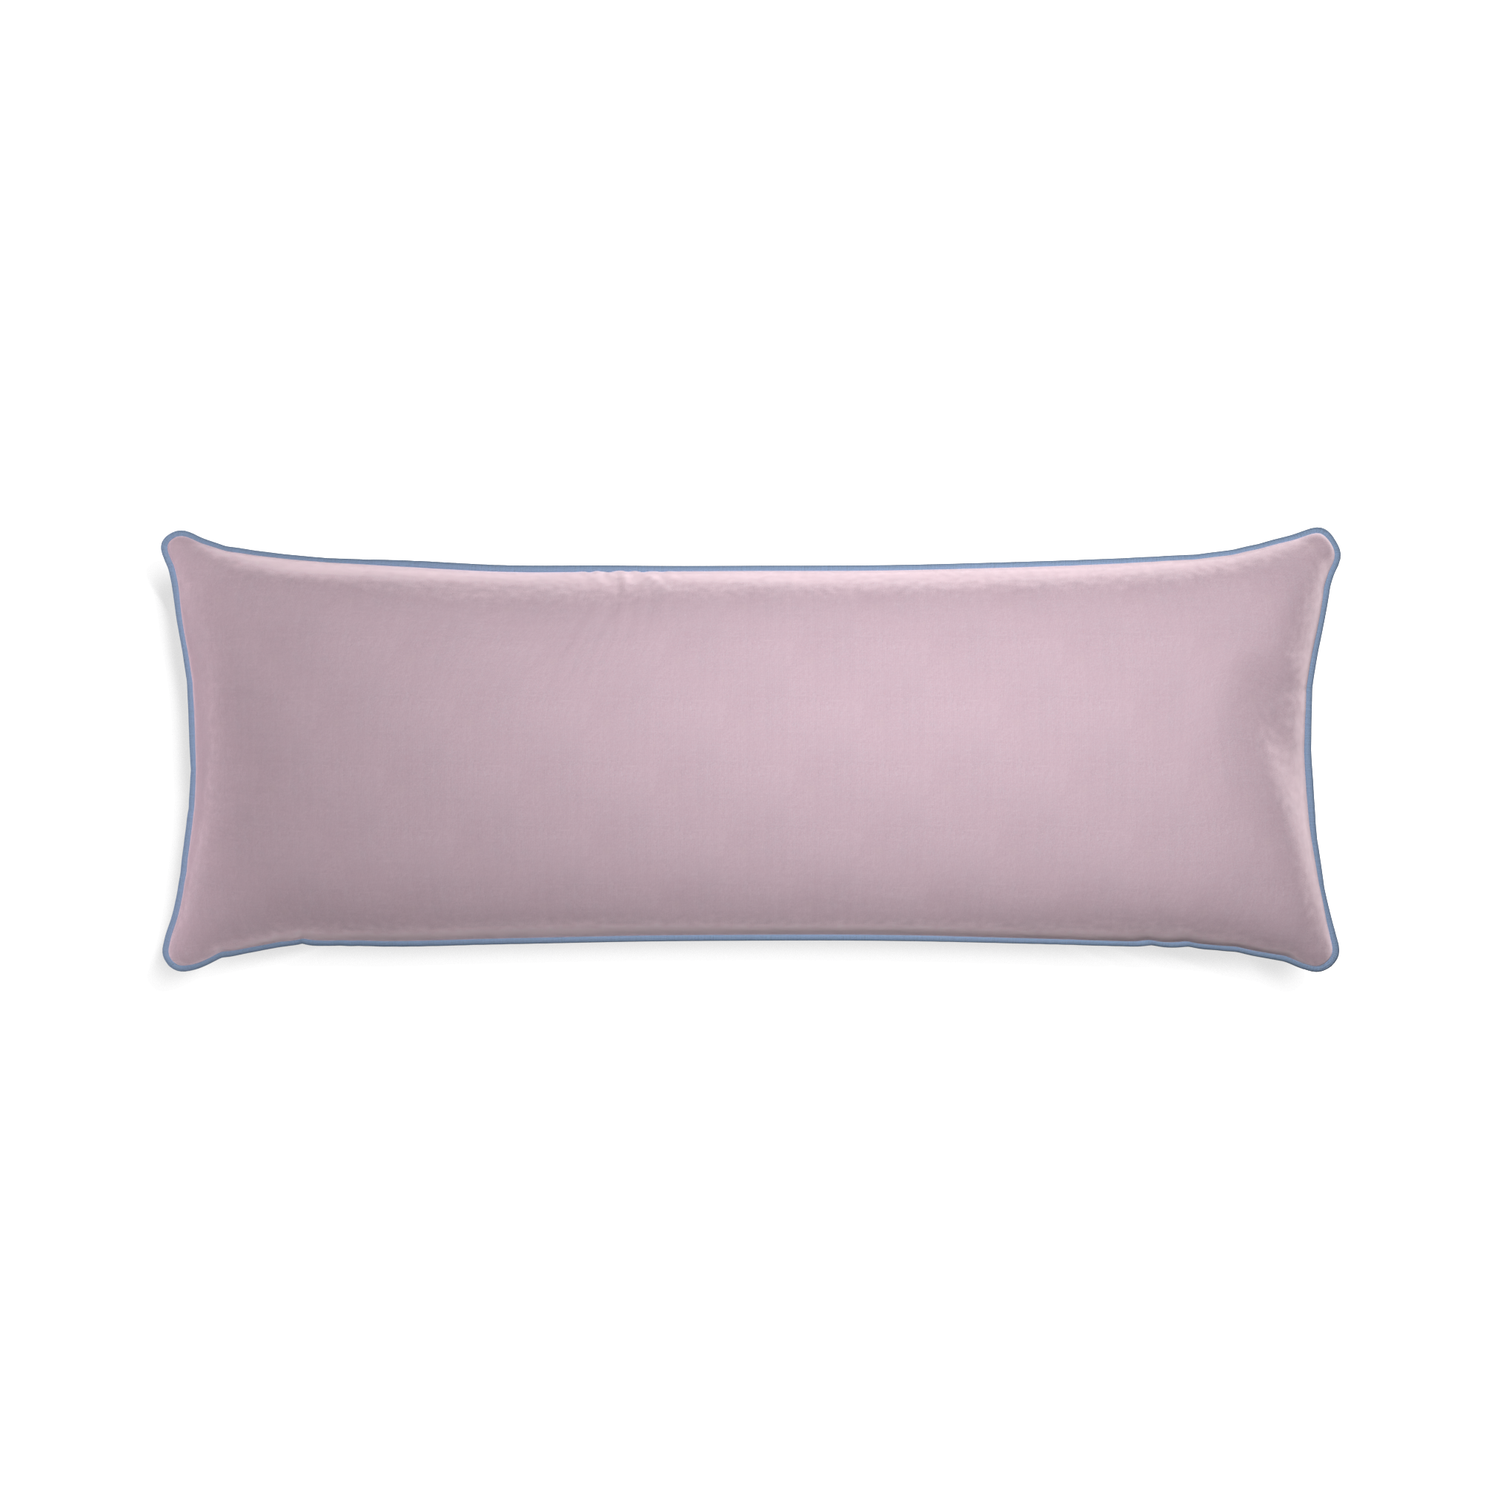 Xl-lumbar lilac velvet custom pillow with sky piping on white background